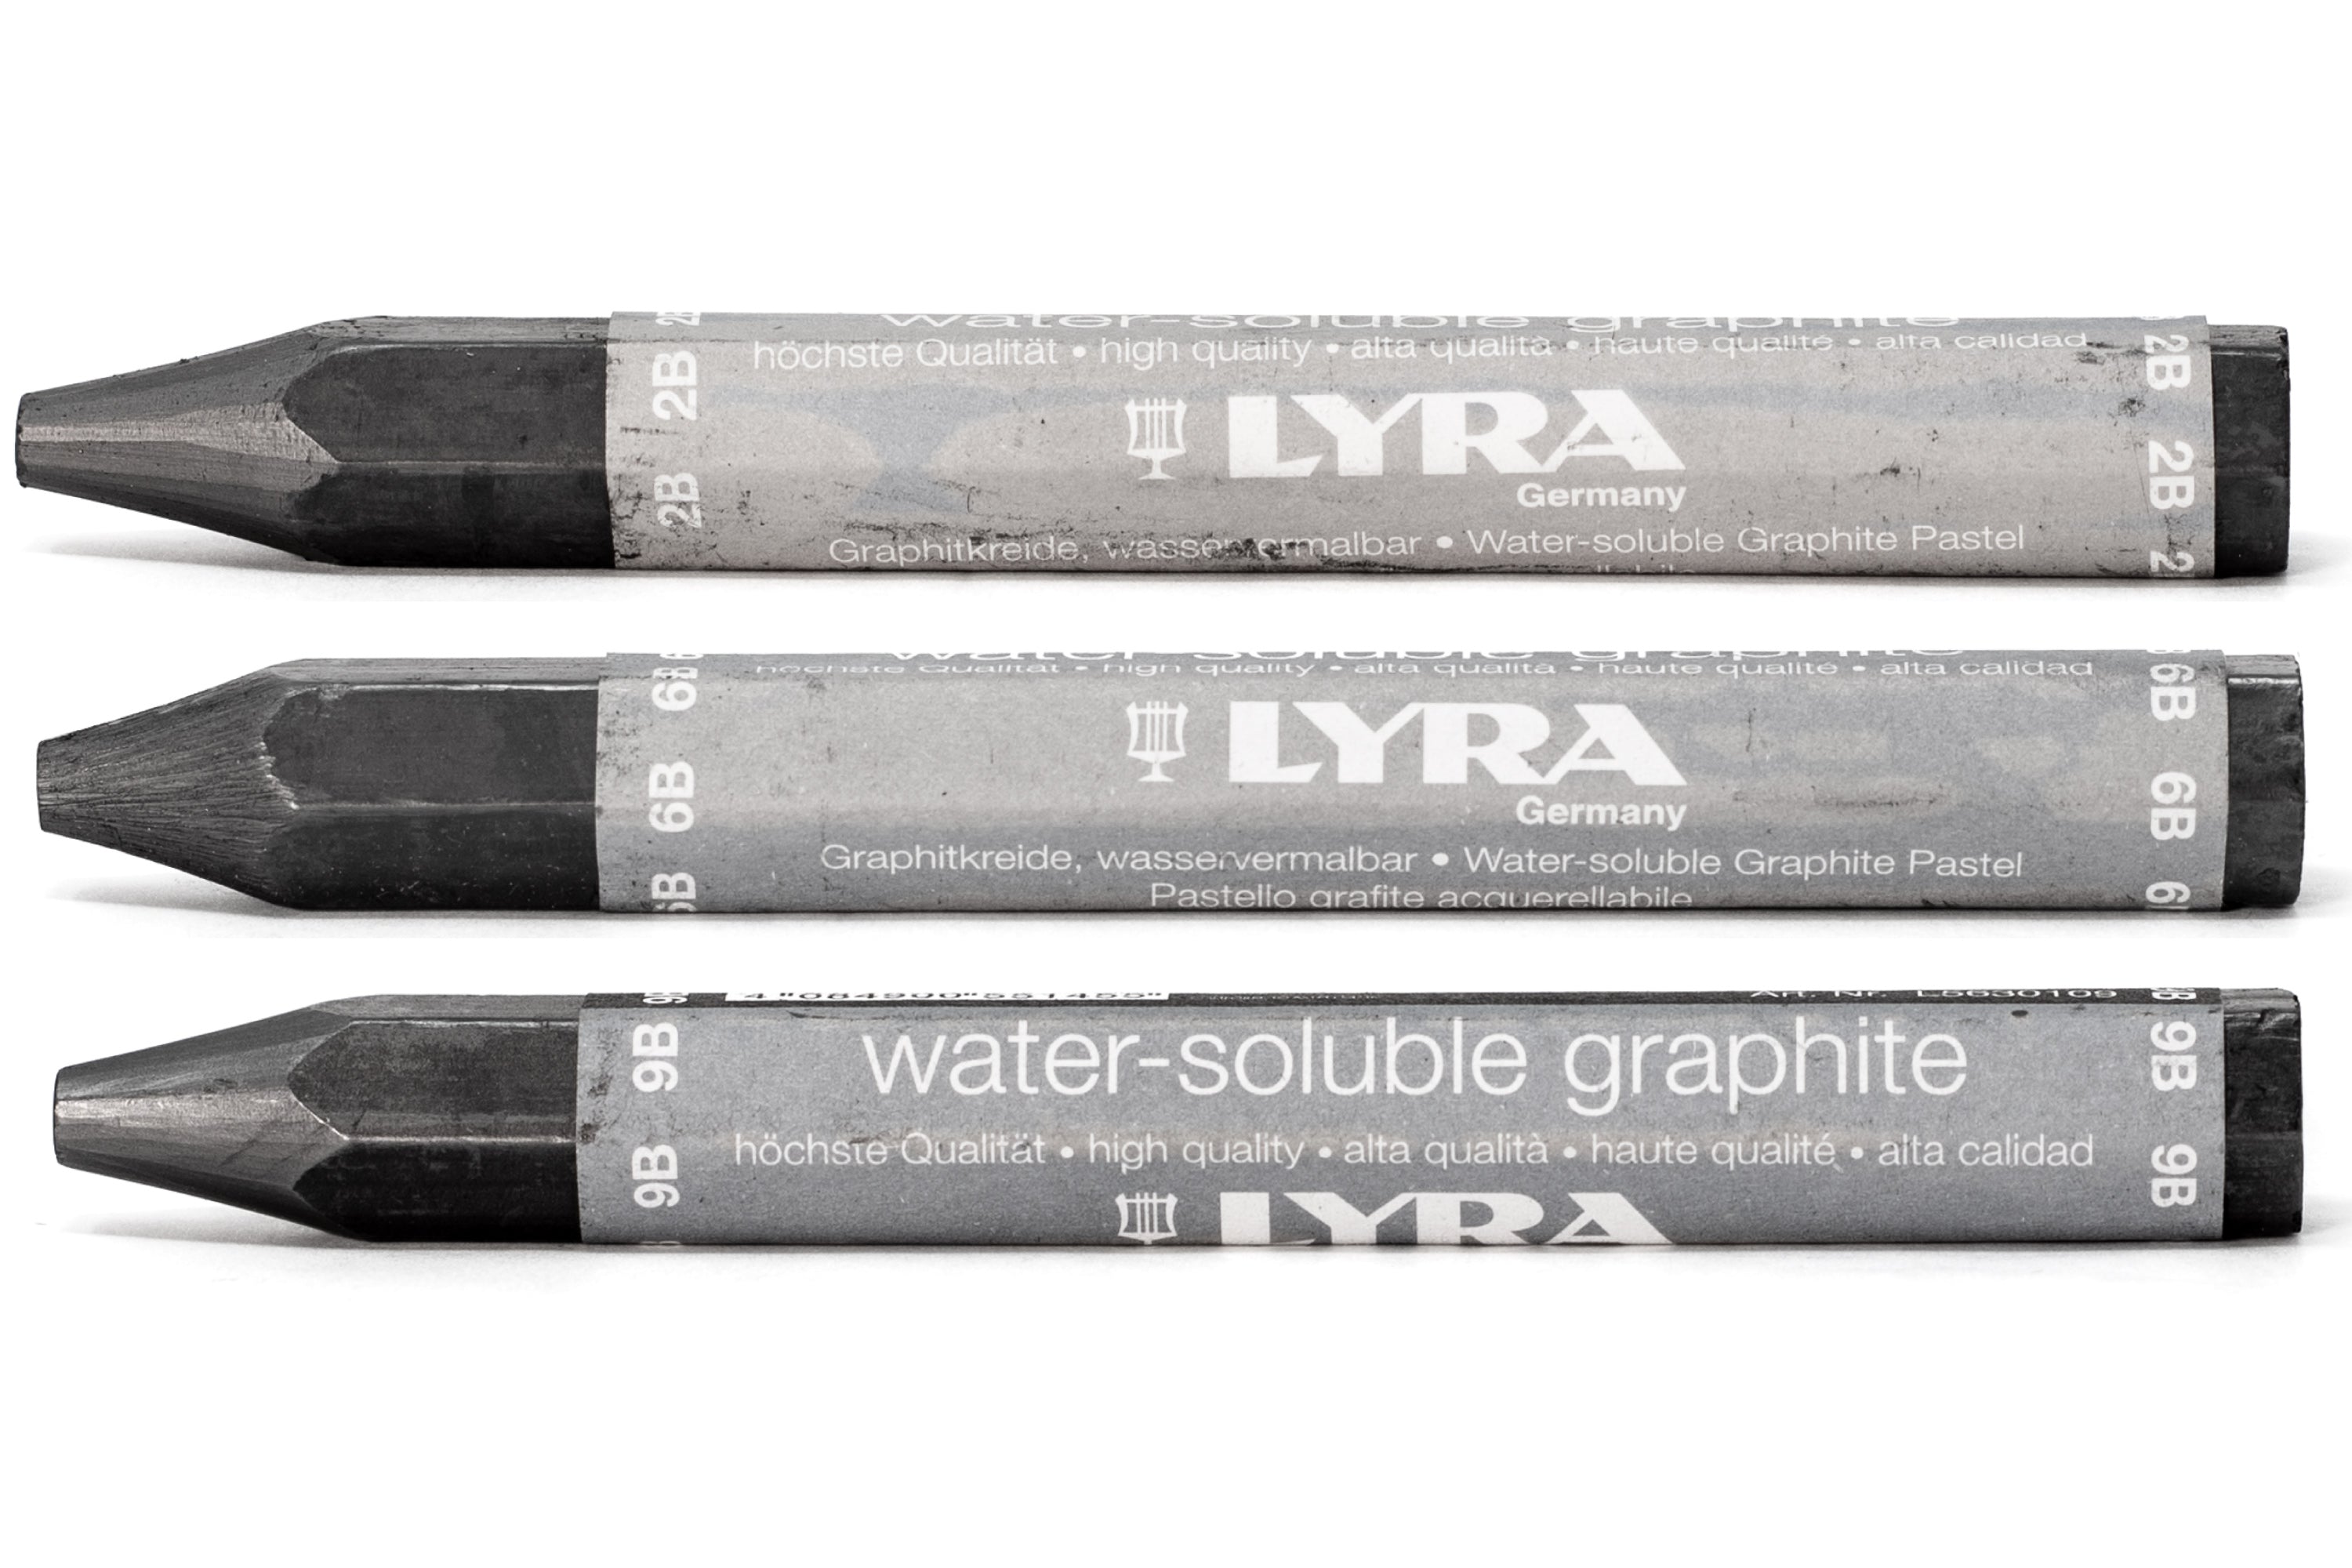 Water-soluble graphite crayons